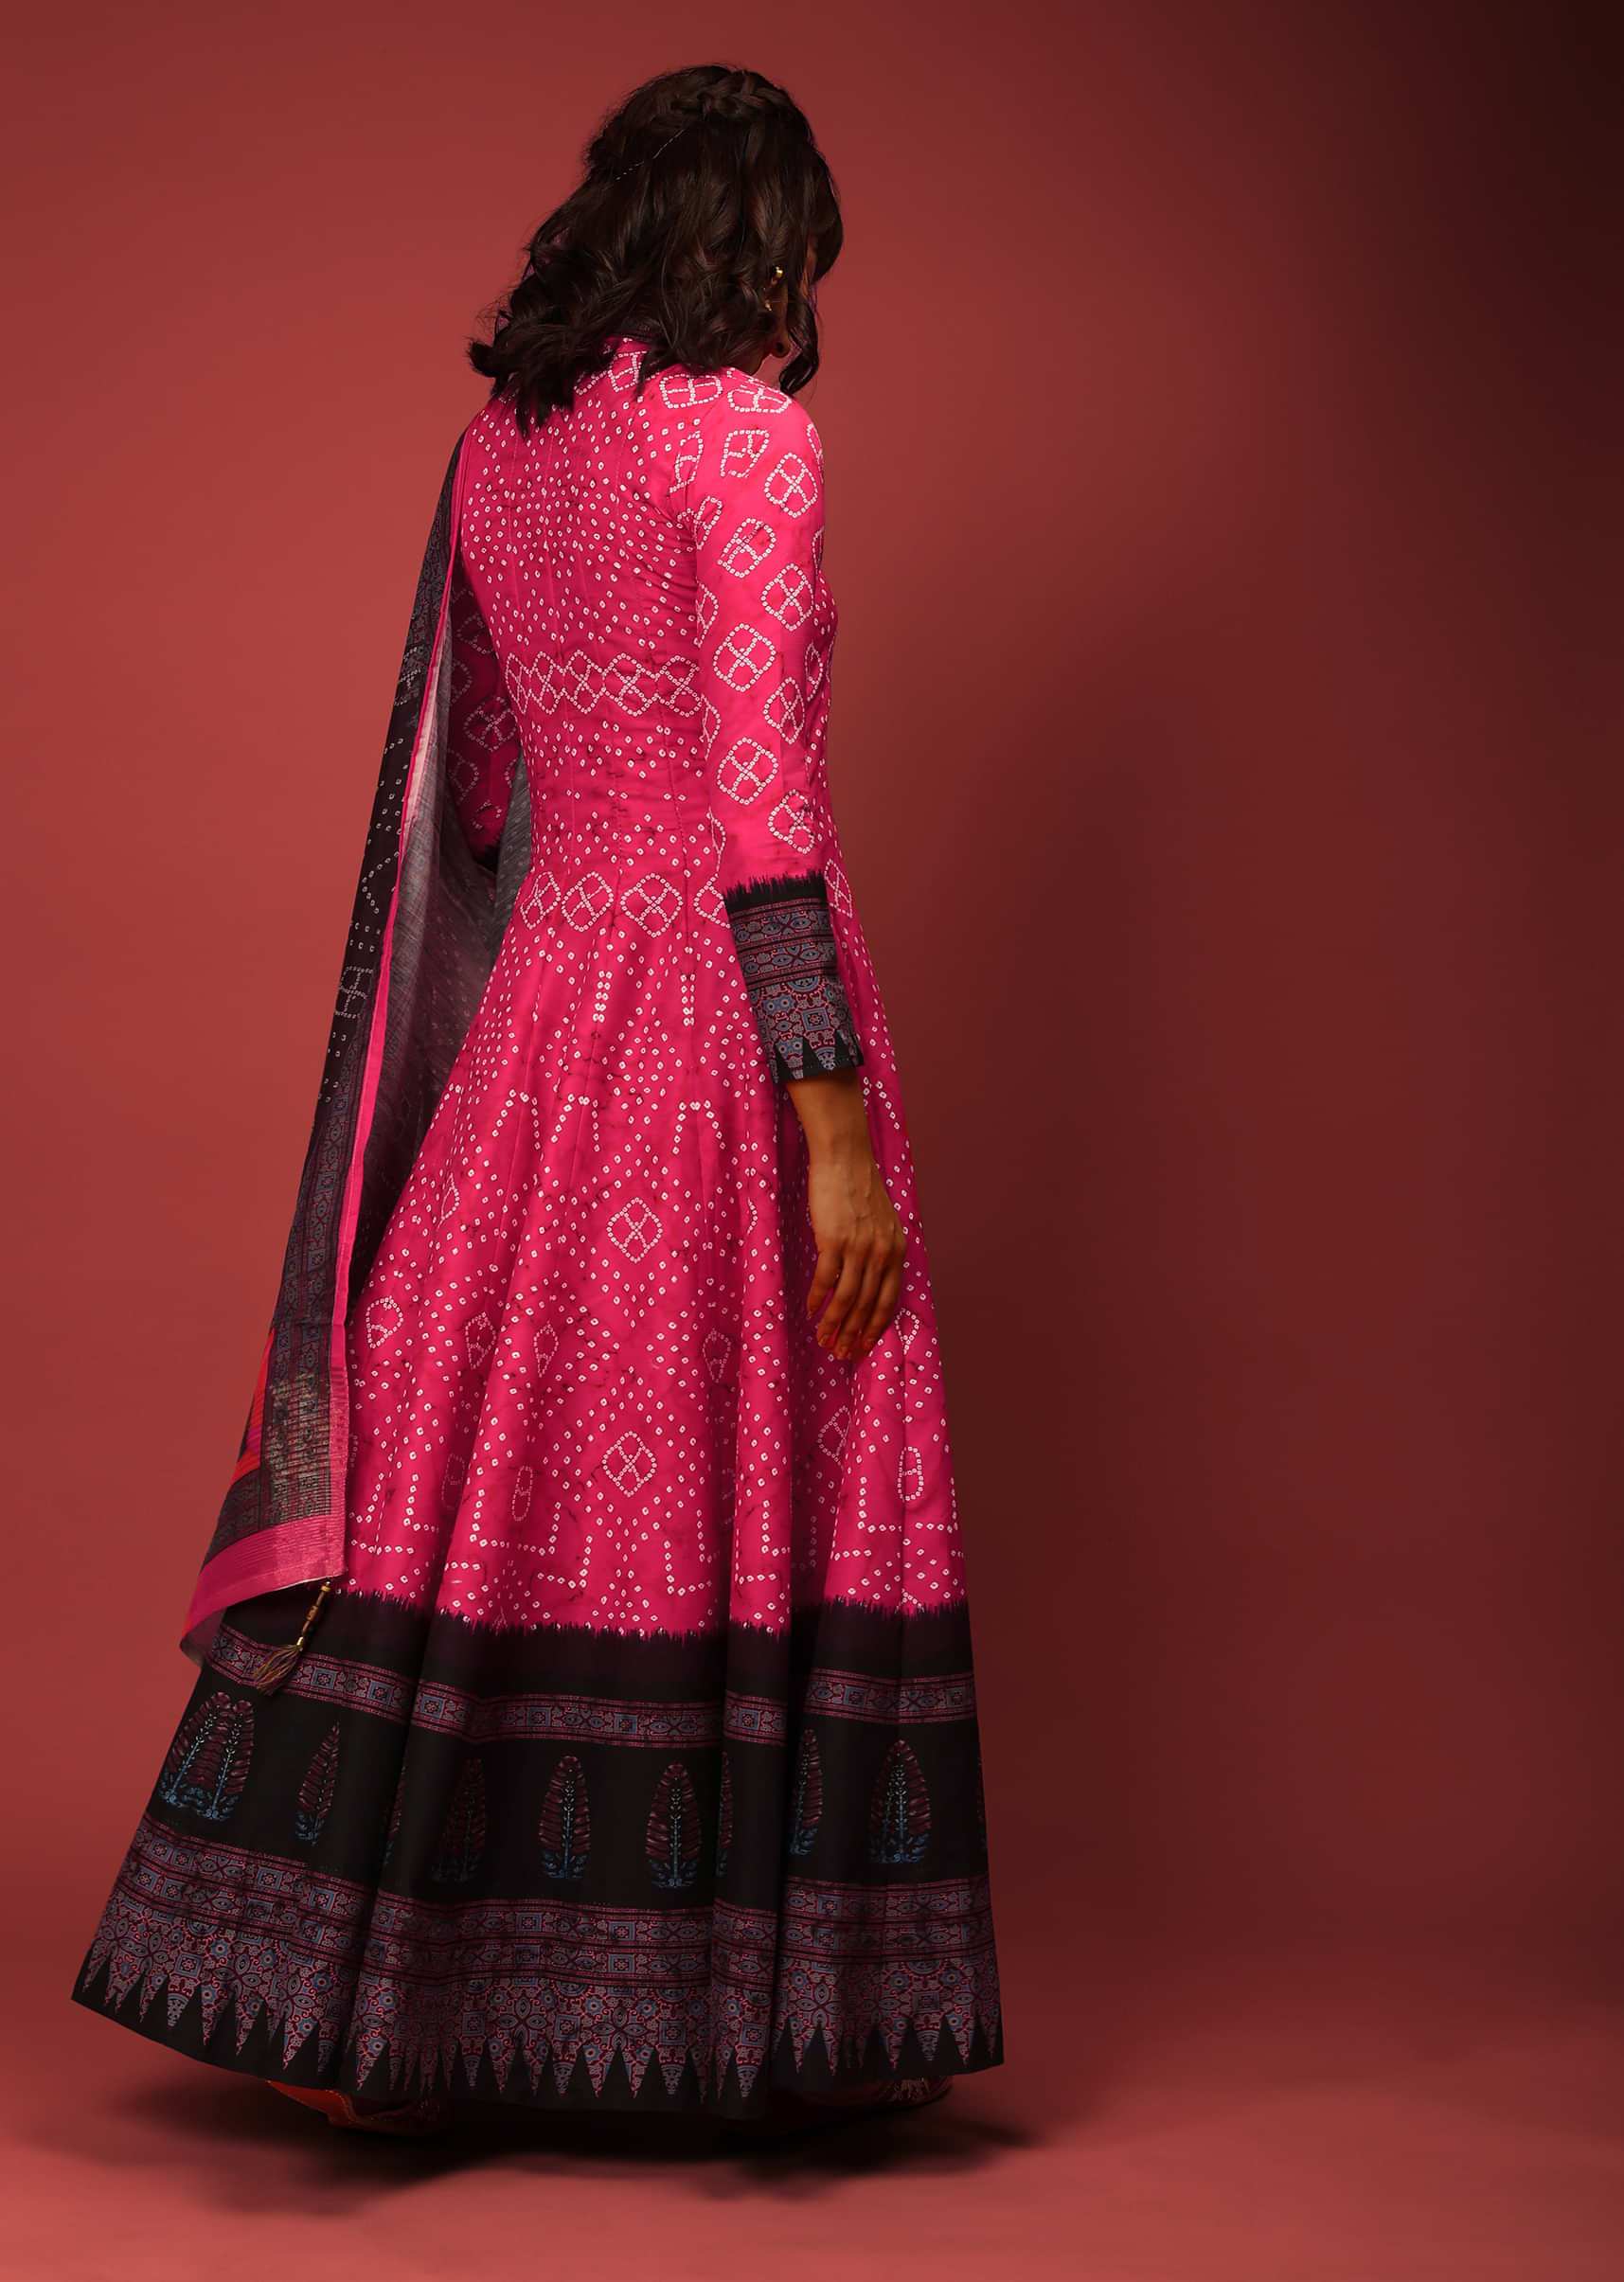 Hot Pink Anarkali Suit In Silk With Bandhani Design And Contrasting Maroon Block Printed Border